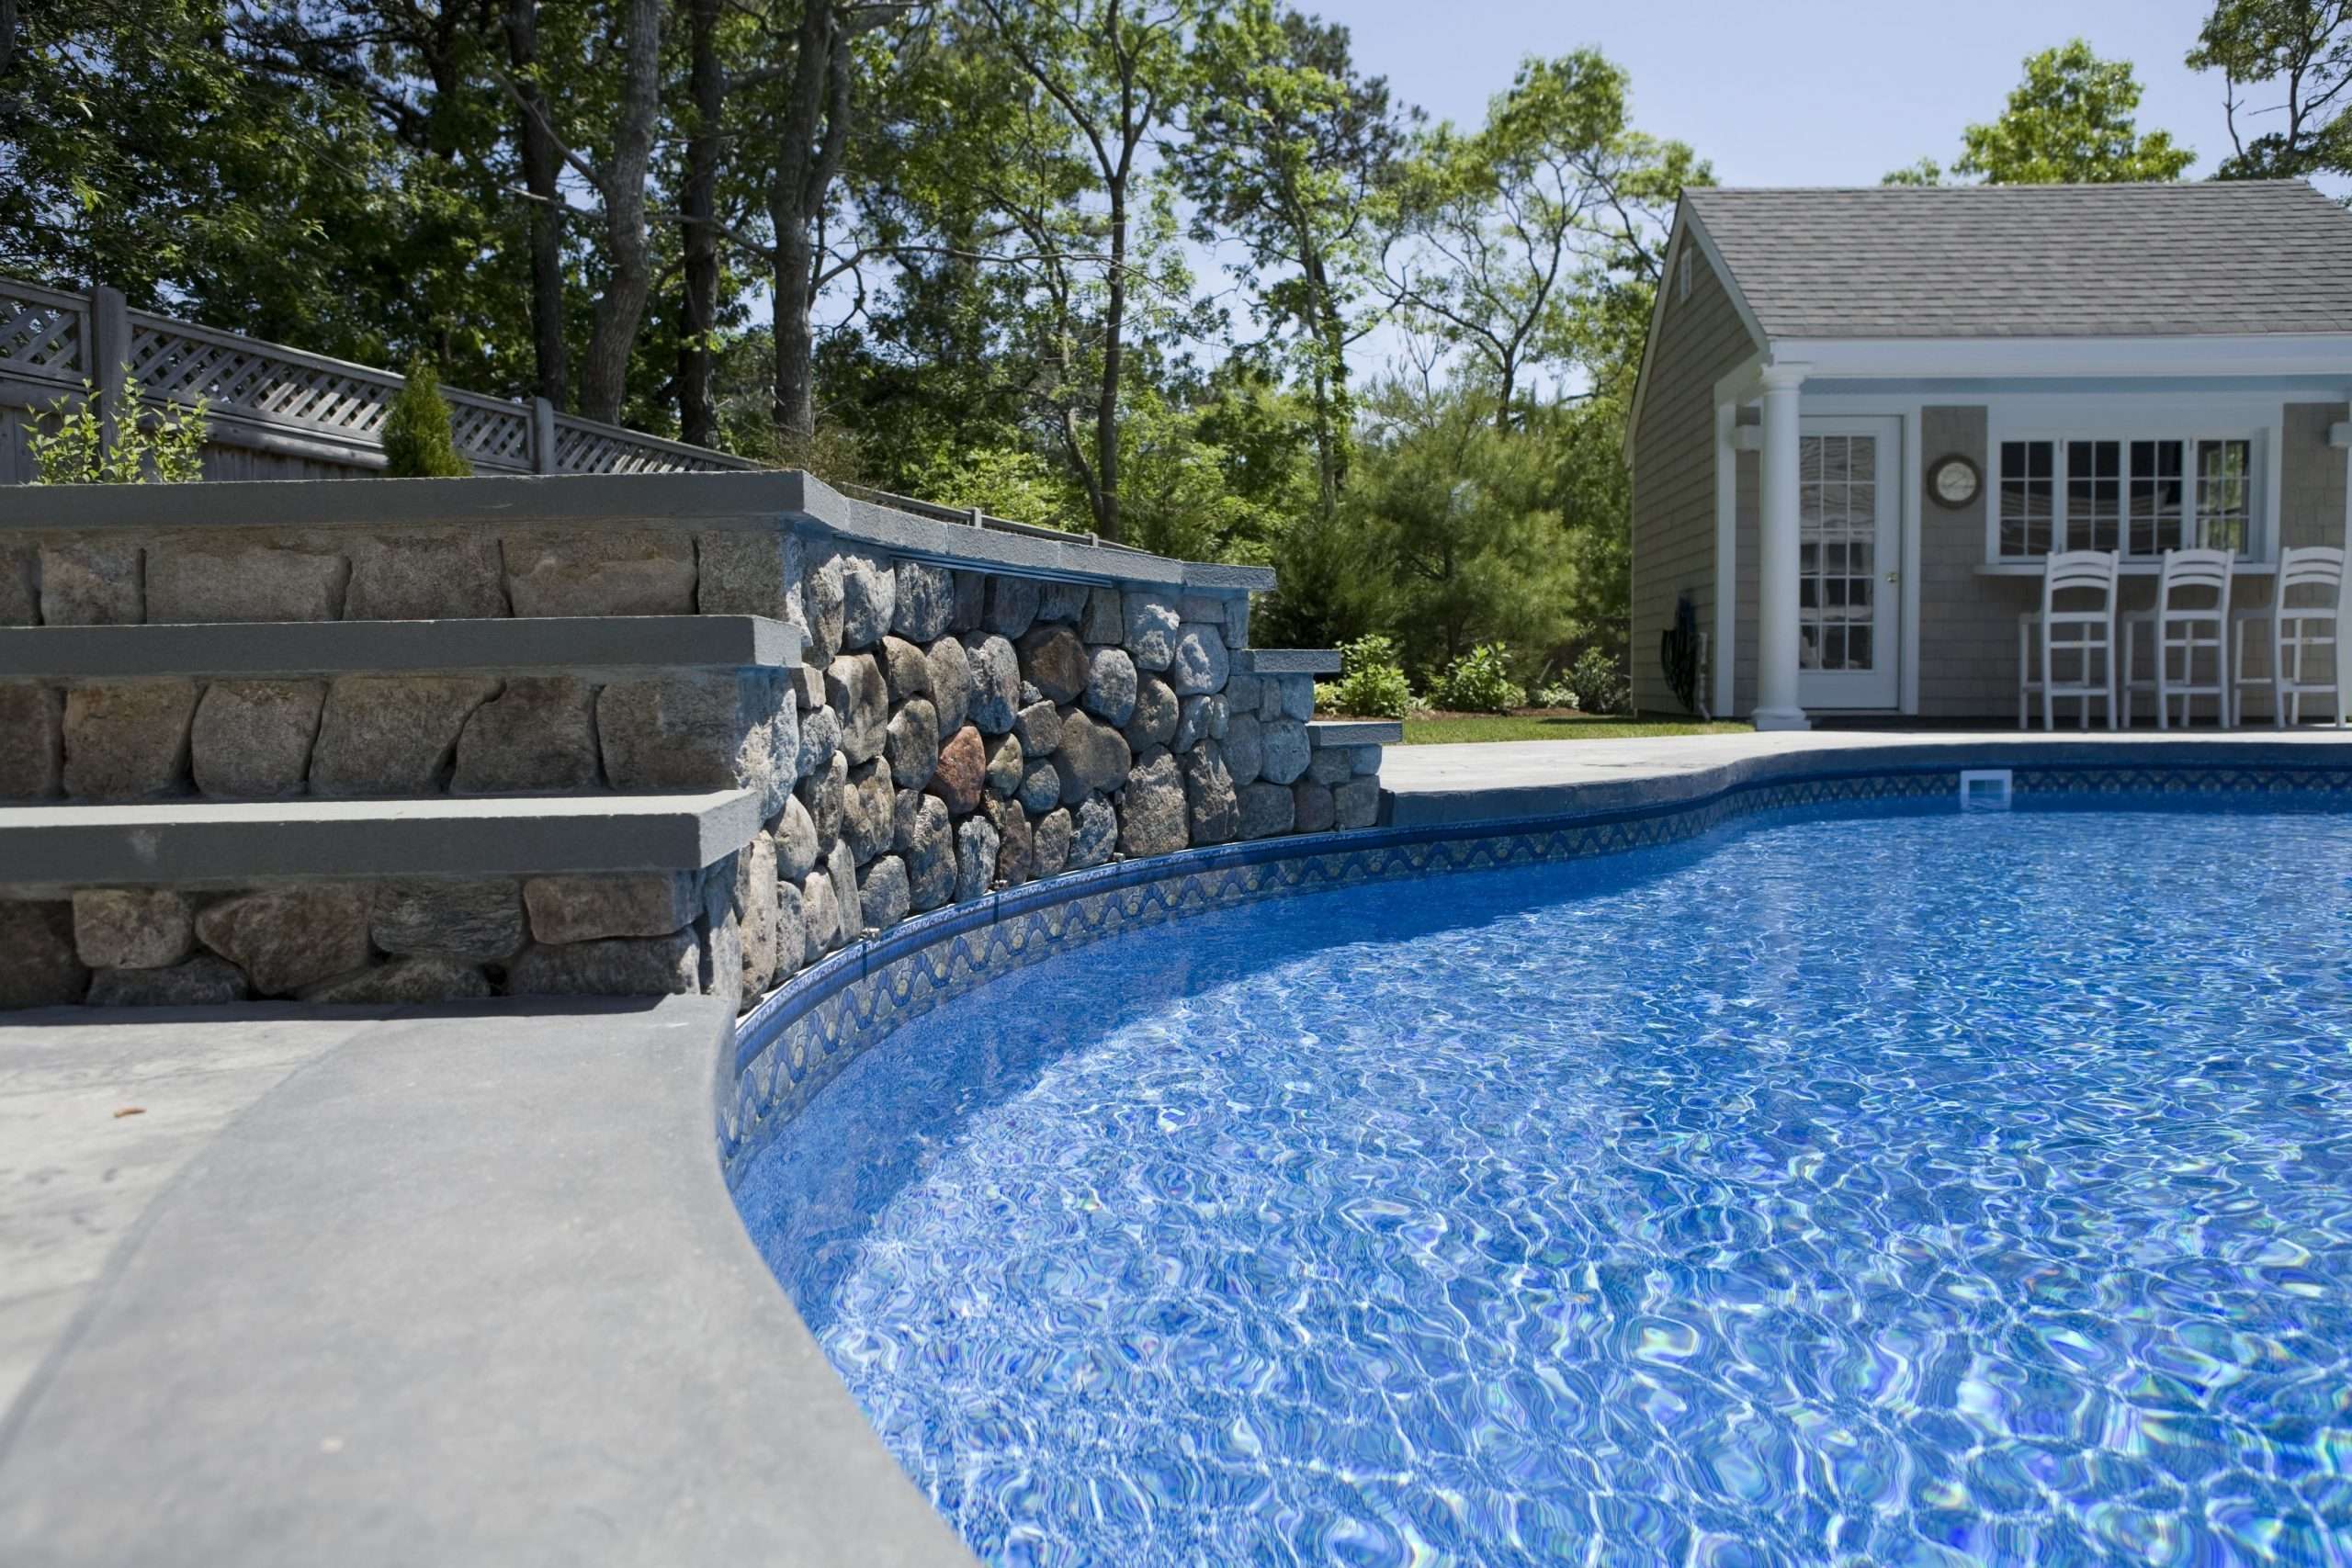 Saltwater Or Chlorine Pool Which Is Better / Saltwater Or Chlorinated ...